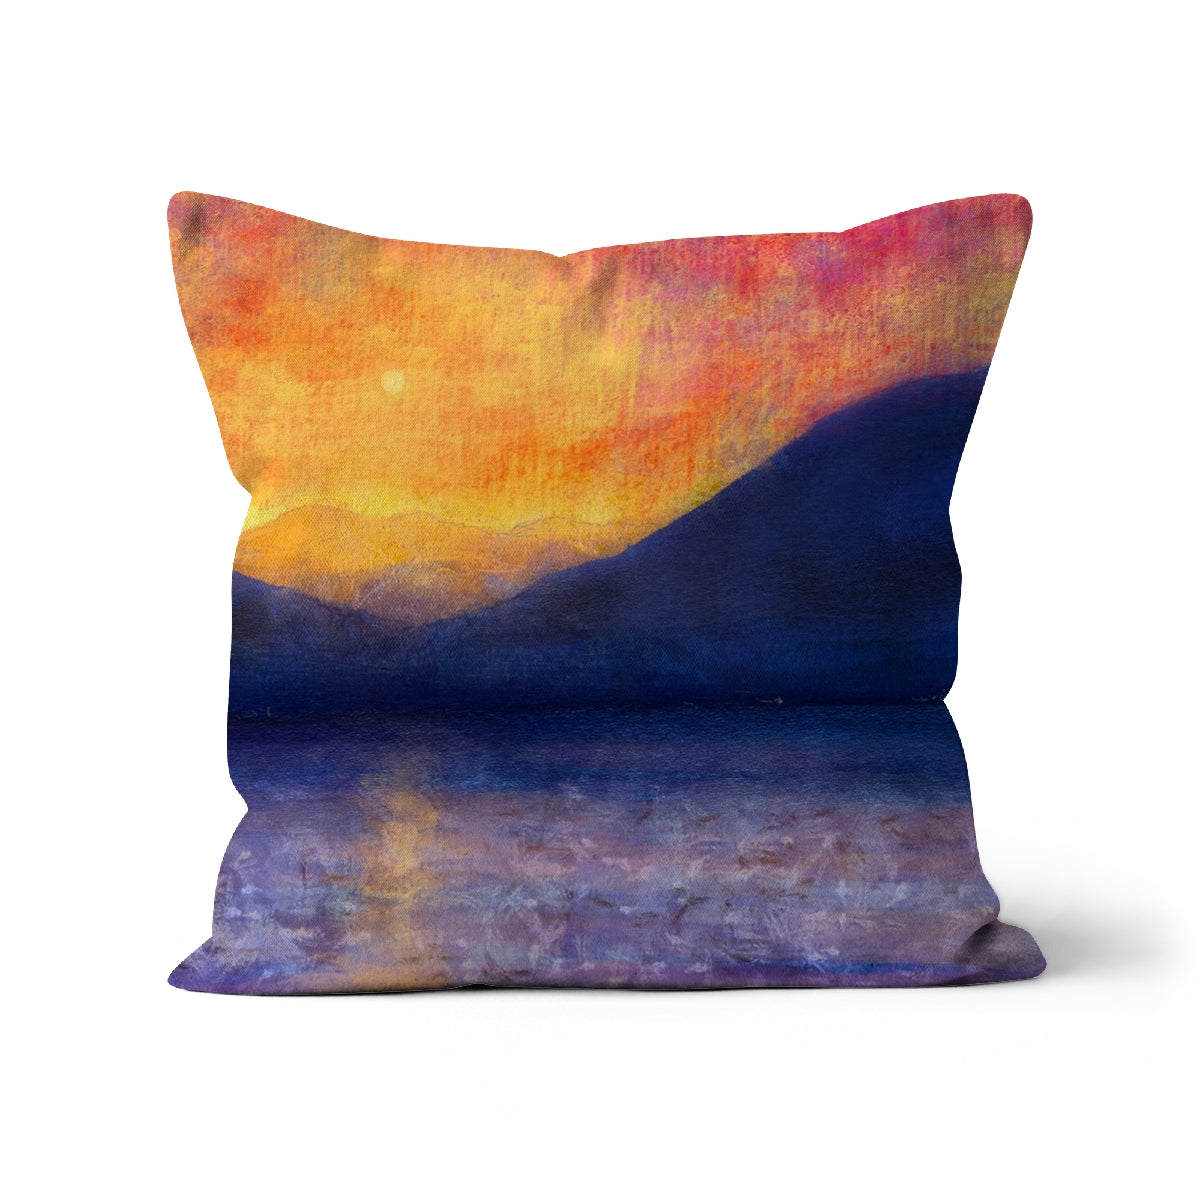 Sunset Approaching Mull Art Gifts Cushion-Cushions-Hebridean Islands Art Gallery-Linen-18"x18"-Paintings, Prints, Homeware, Art Gifts From Scotland By Scottish Artist Kevin Hunter